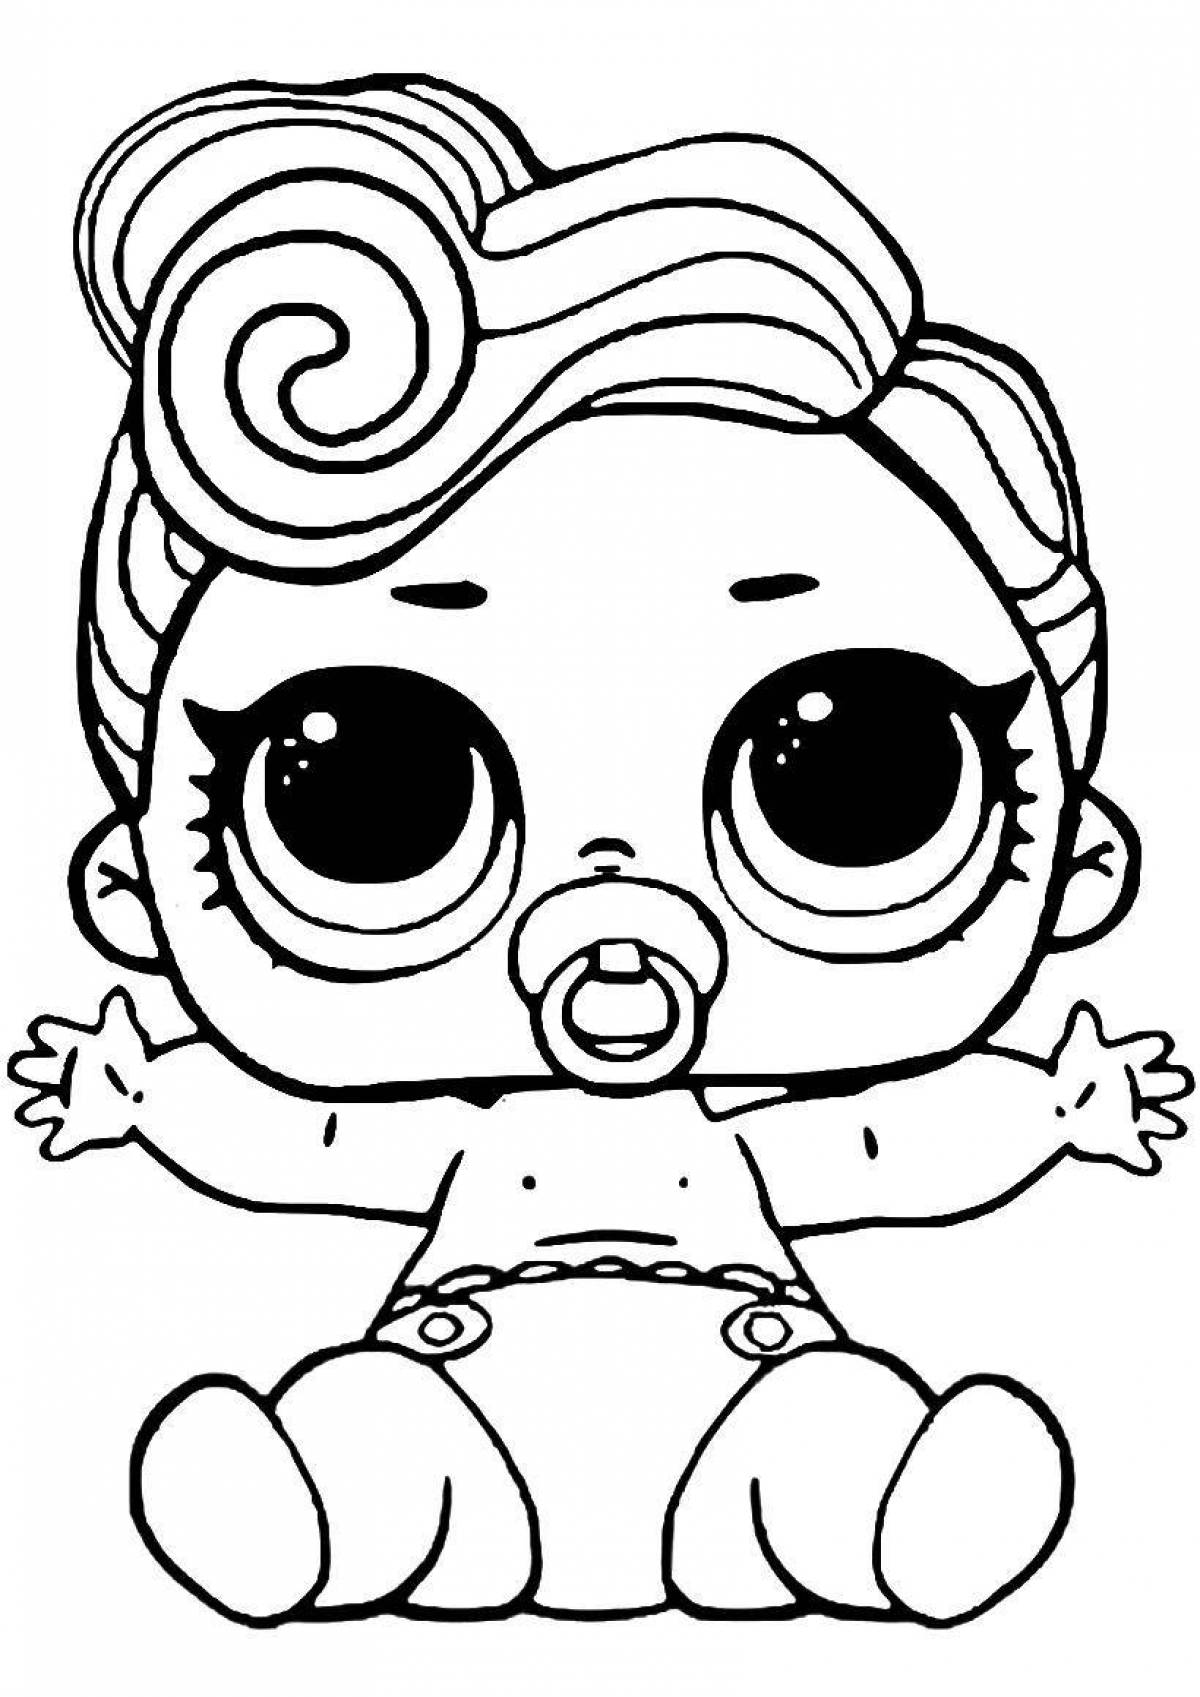 Coloring book lol doll